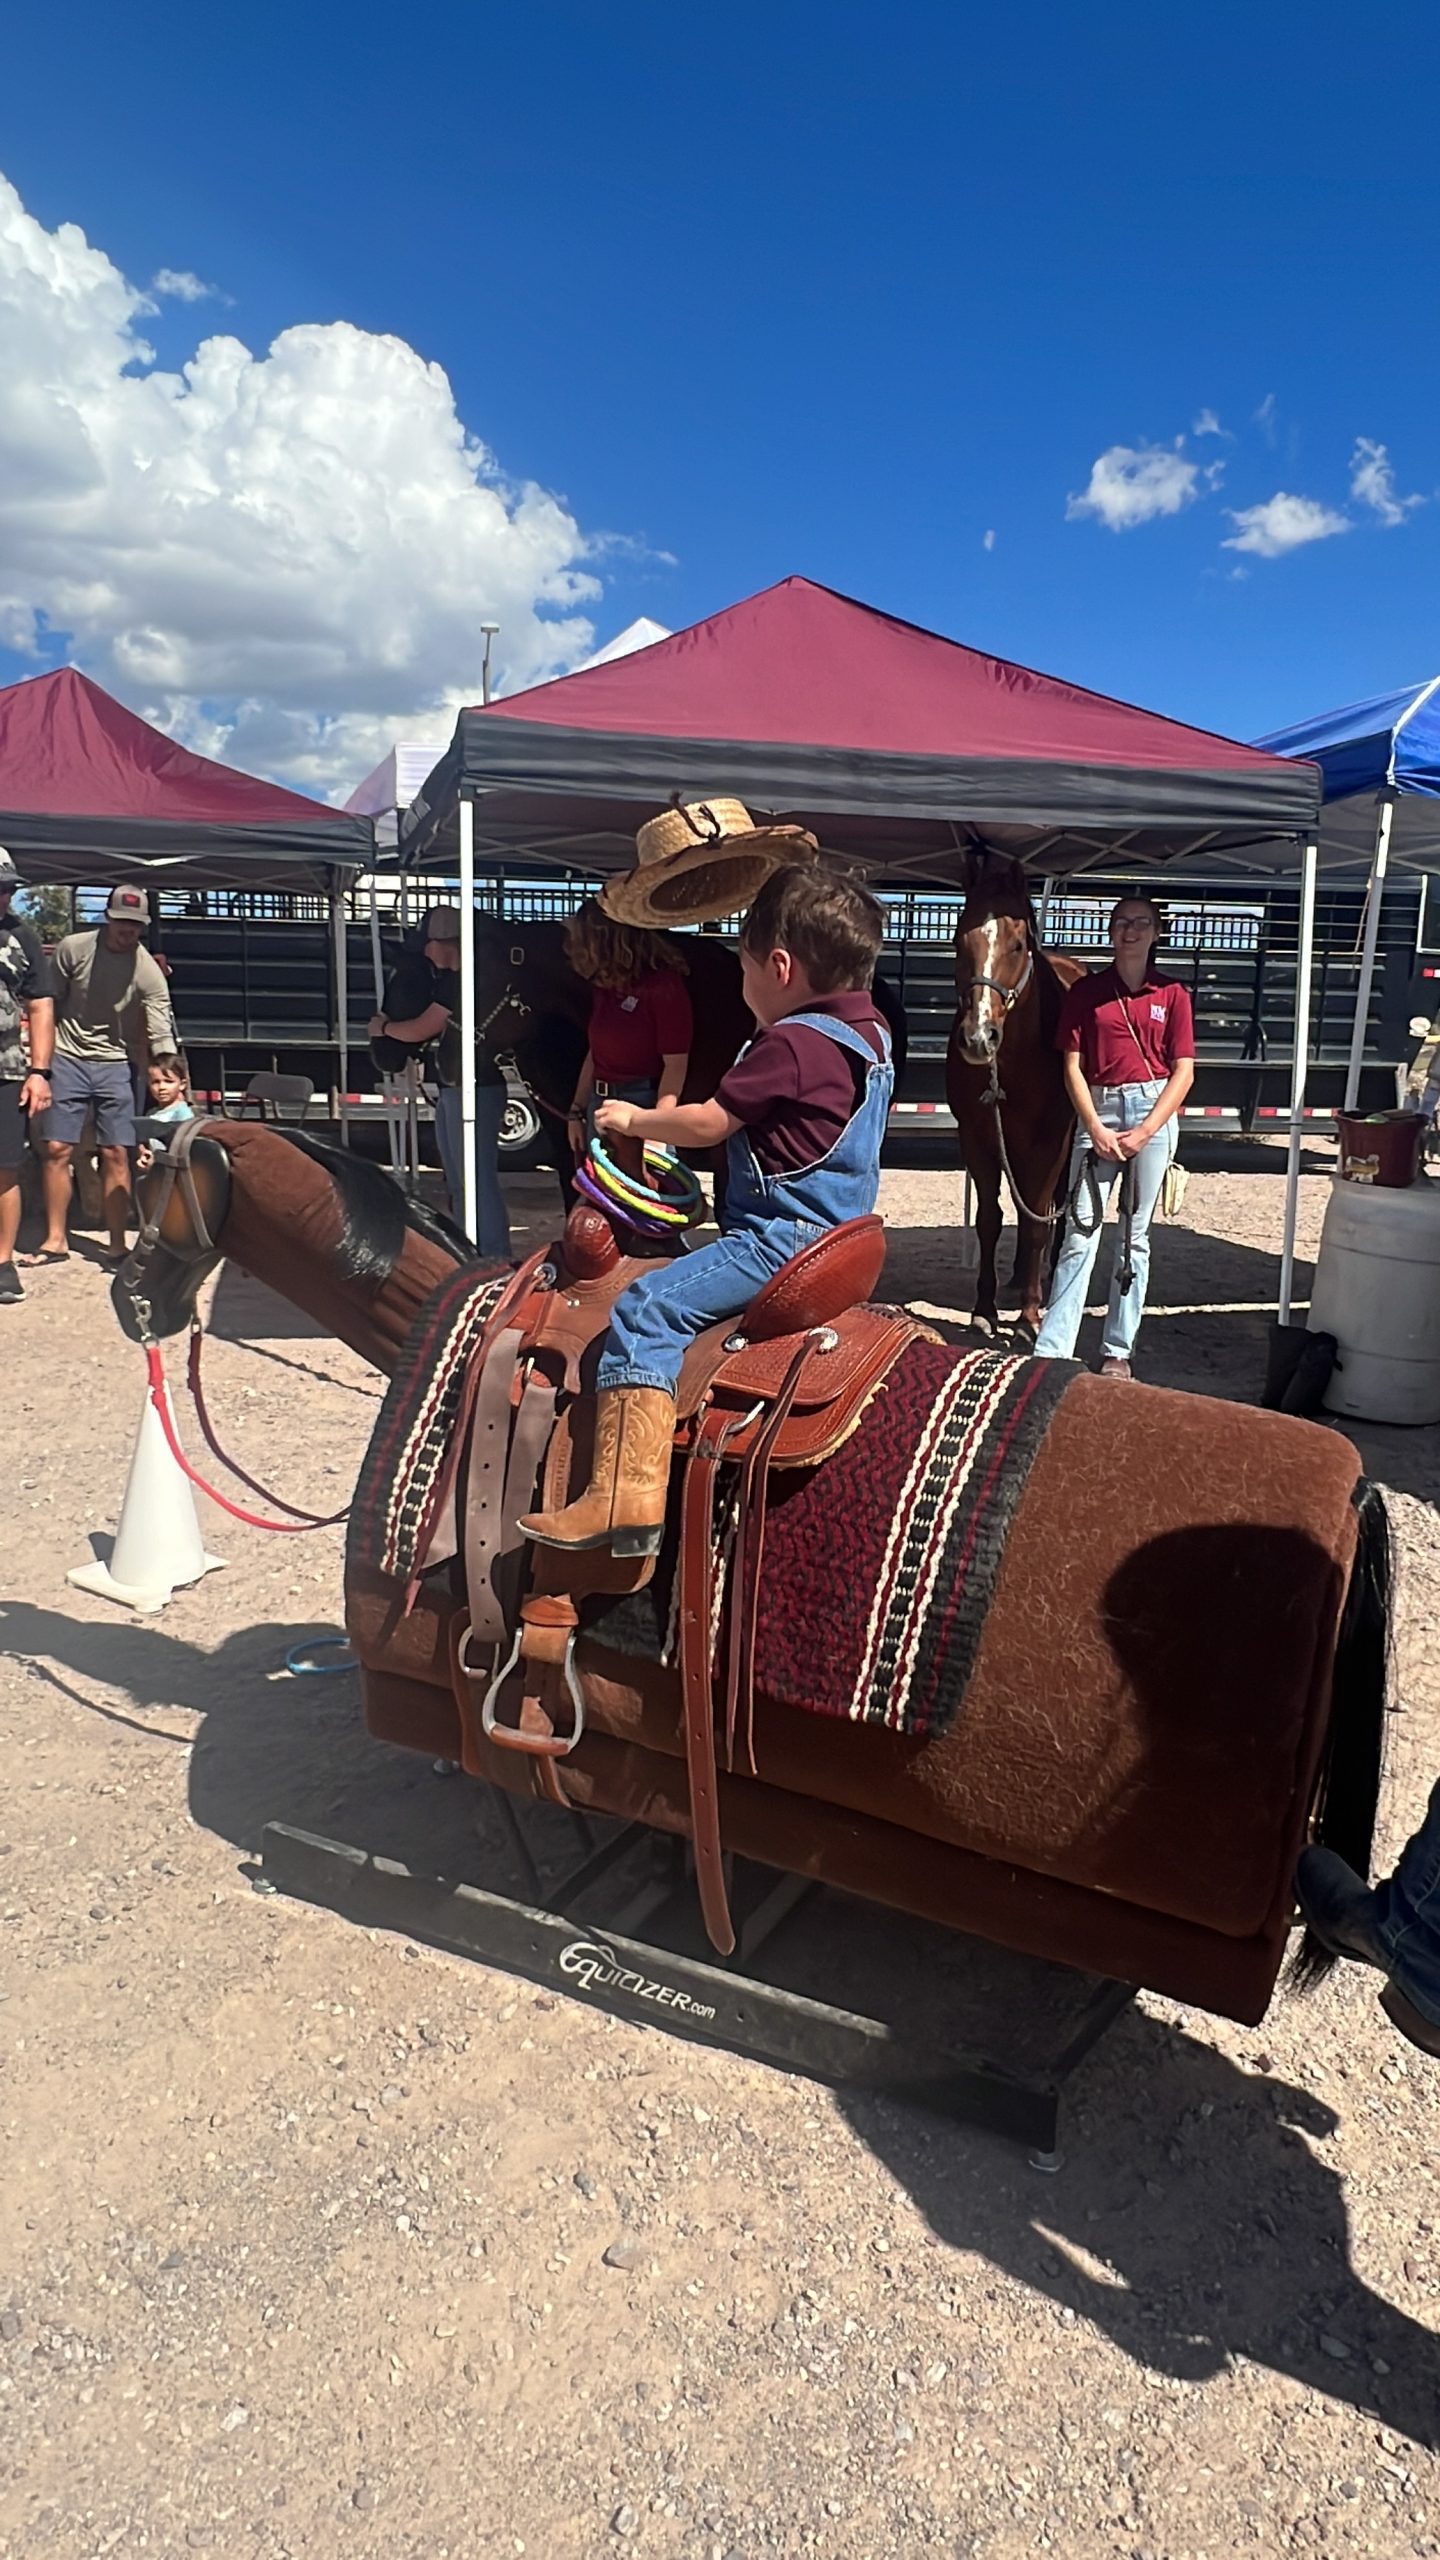 A young cowboy enjoys the fun at AG Day by riding a rocking horse. The 2023 AG Day is Nov. 4 at New Mexico State University. AG Day is a free, educational event that features family-friendly activities from 1 to 4 p.m. leading up to the Aggie football game at 4 p.m. (Photo courtesy New Mexico Department of Agriculture.)